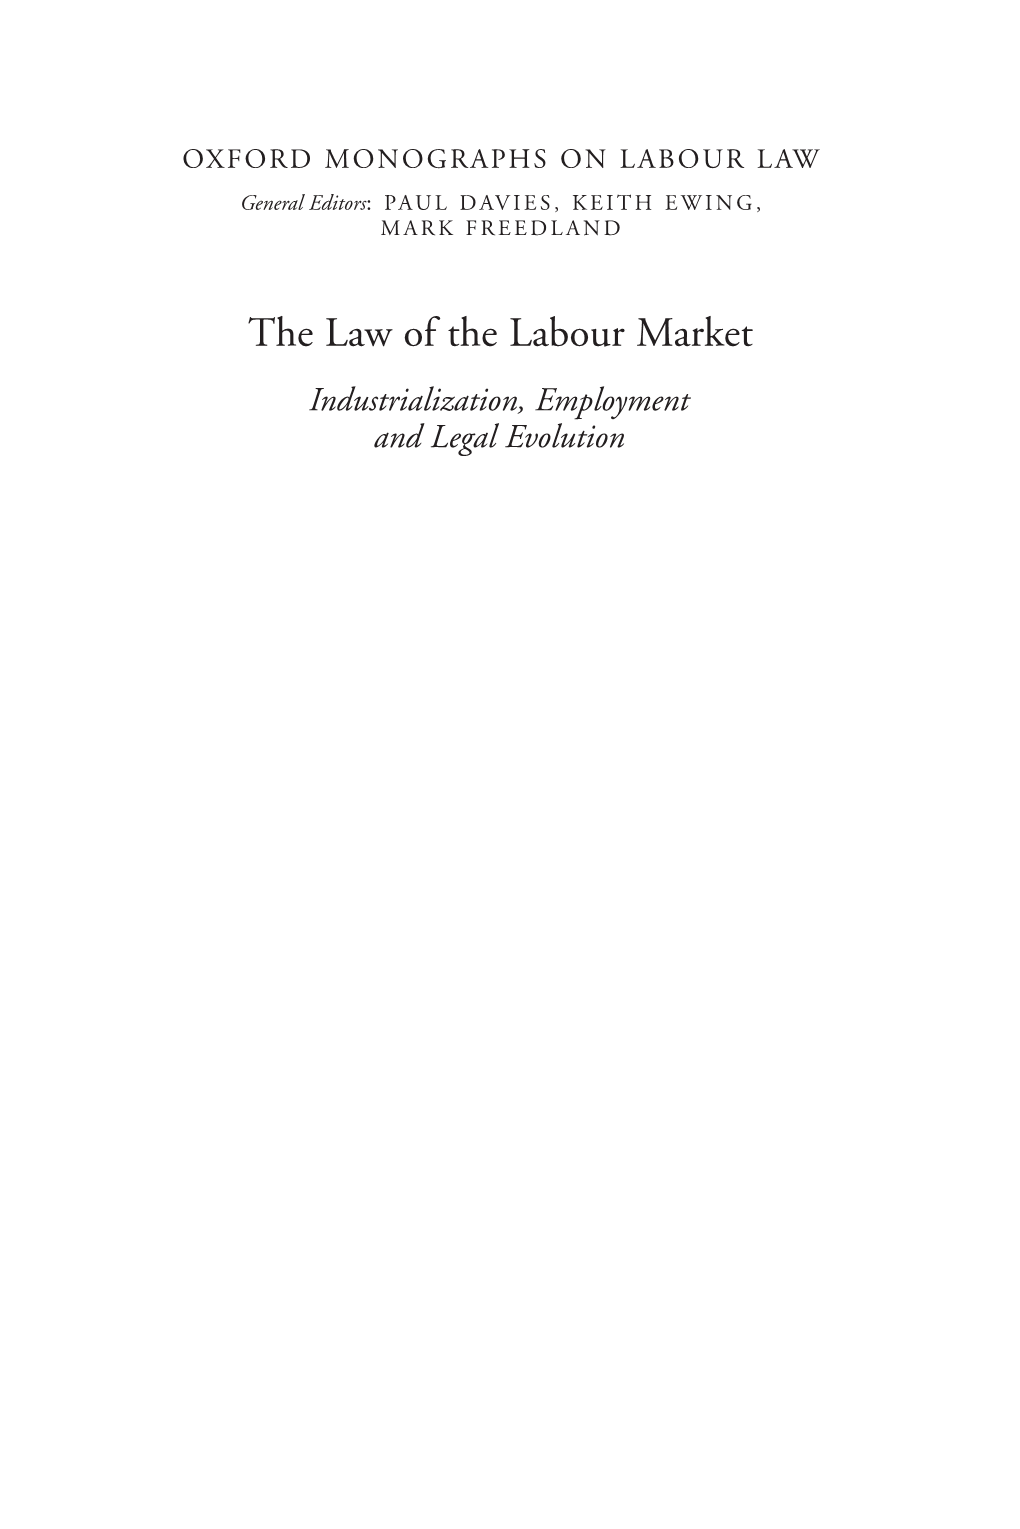 The Law of the Labour Market Industrialization, Employment and Legal Evolution TLLM-FM.Qxd 7/2/05 10:22 PM Page Ii